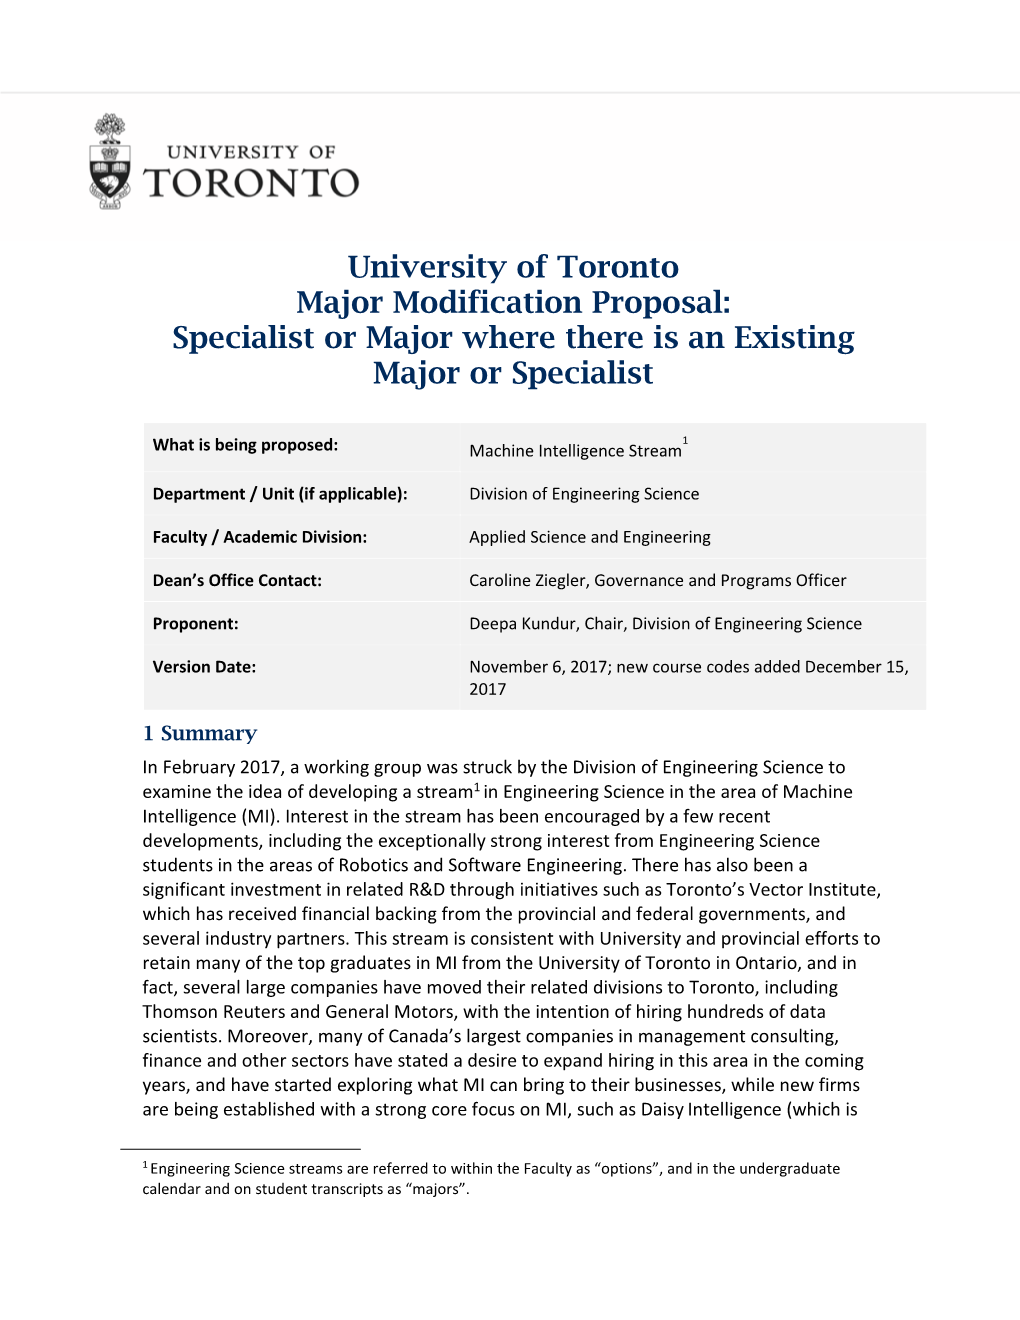 University of Toronto Major Modification Proposal: Specialist Or Major Where There Is an Existing Major Or Specialist